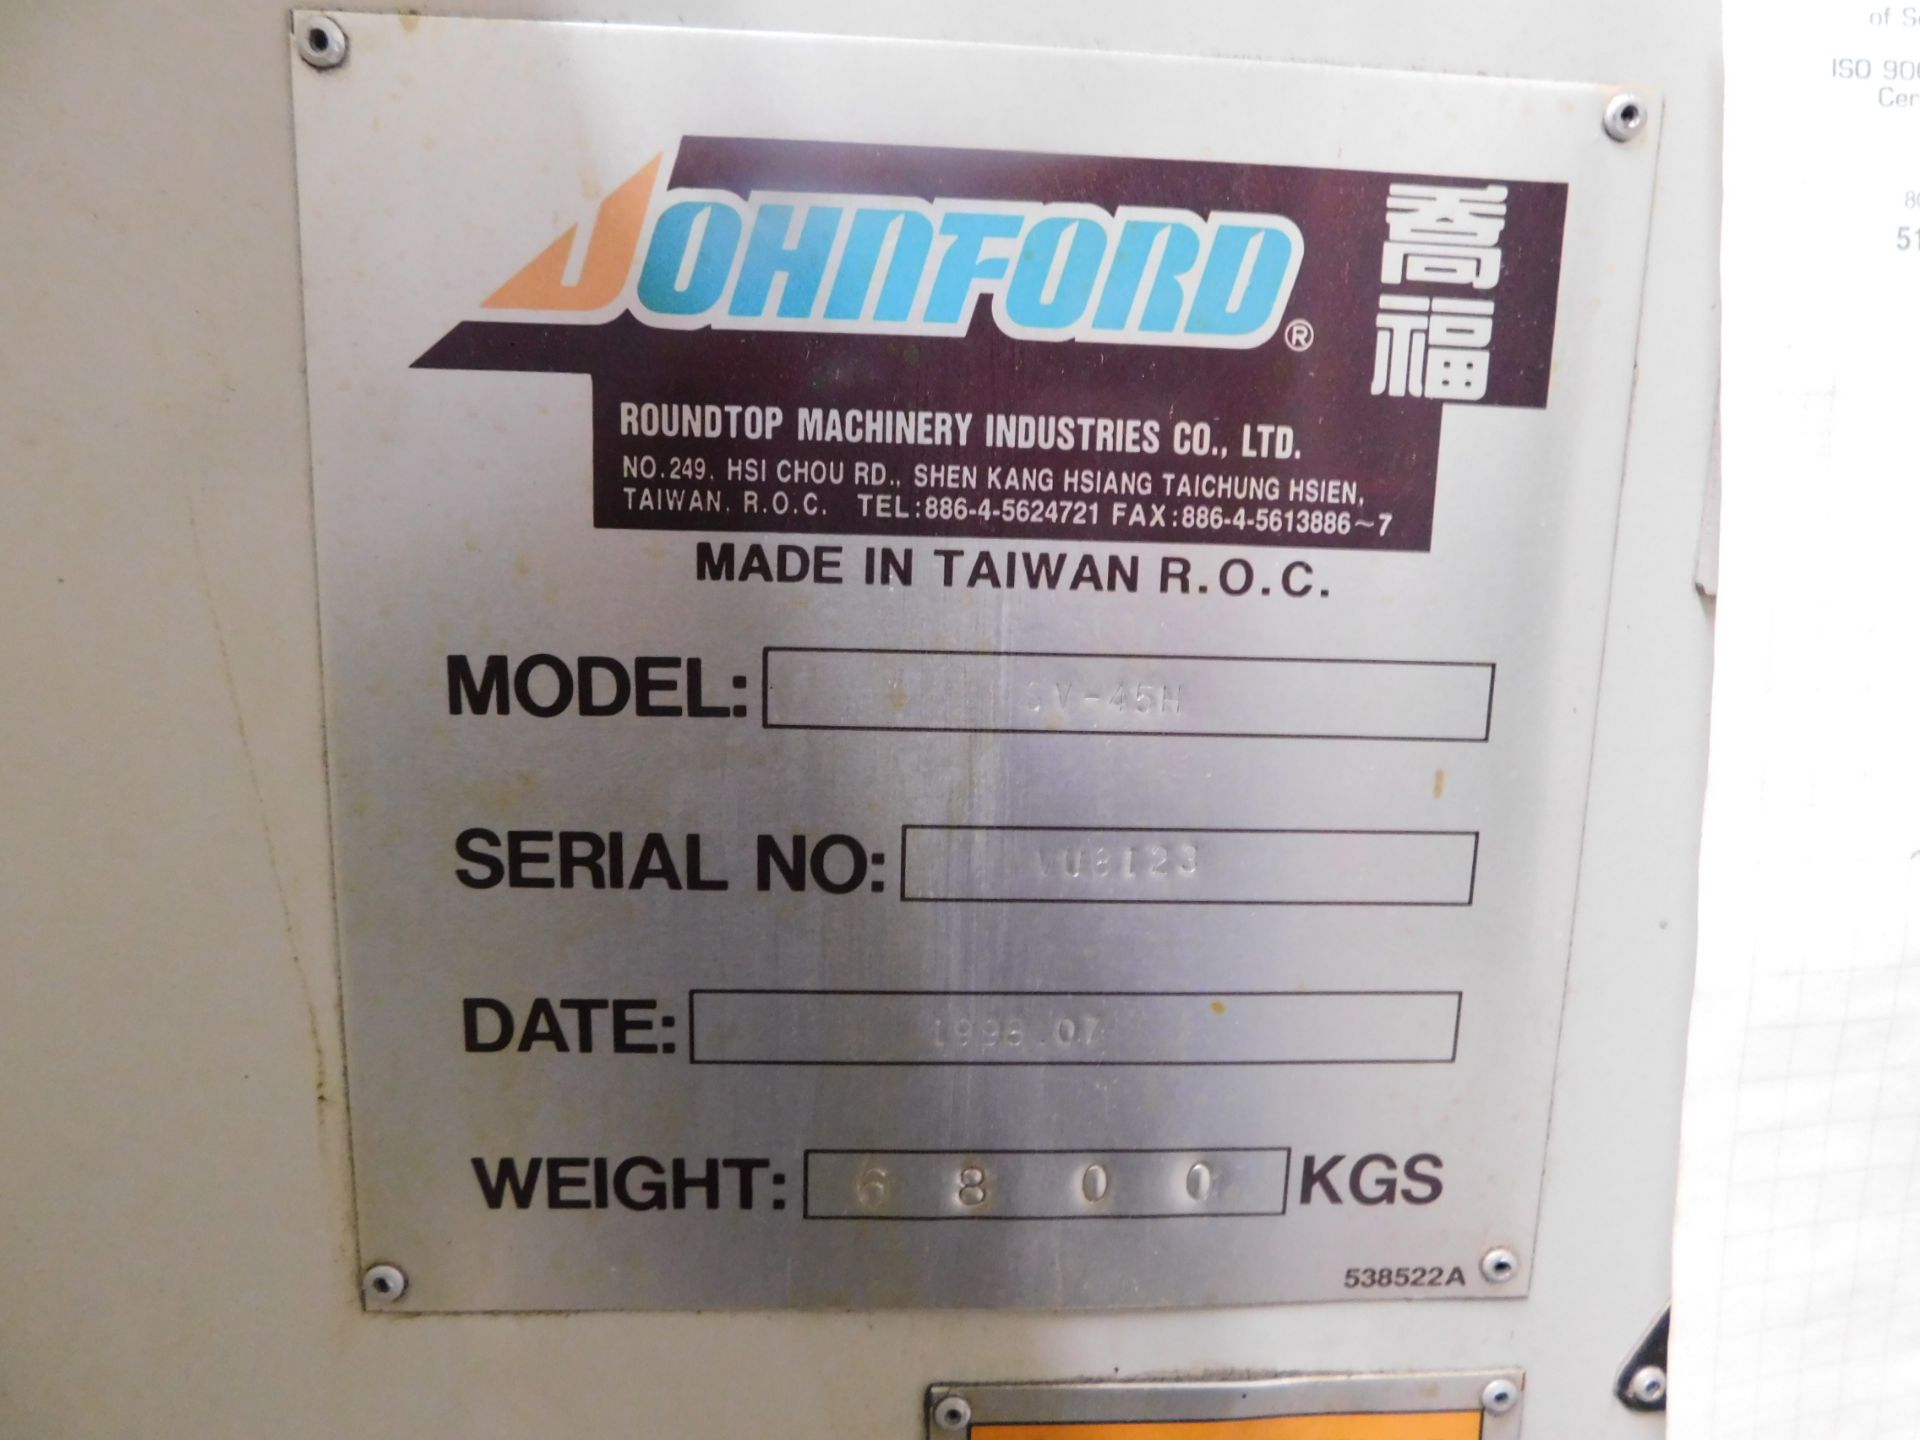 Johnford SV-45H CNC Vertical Machining Center, SN VU8123, New in 1998, 19.7" x 48" Table, Fanuc 18M - Image 16 of 16